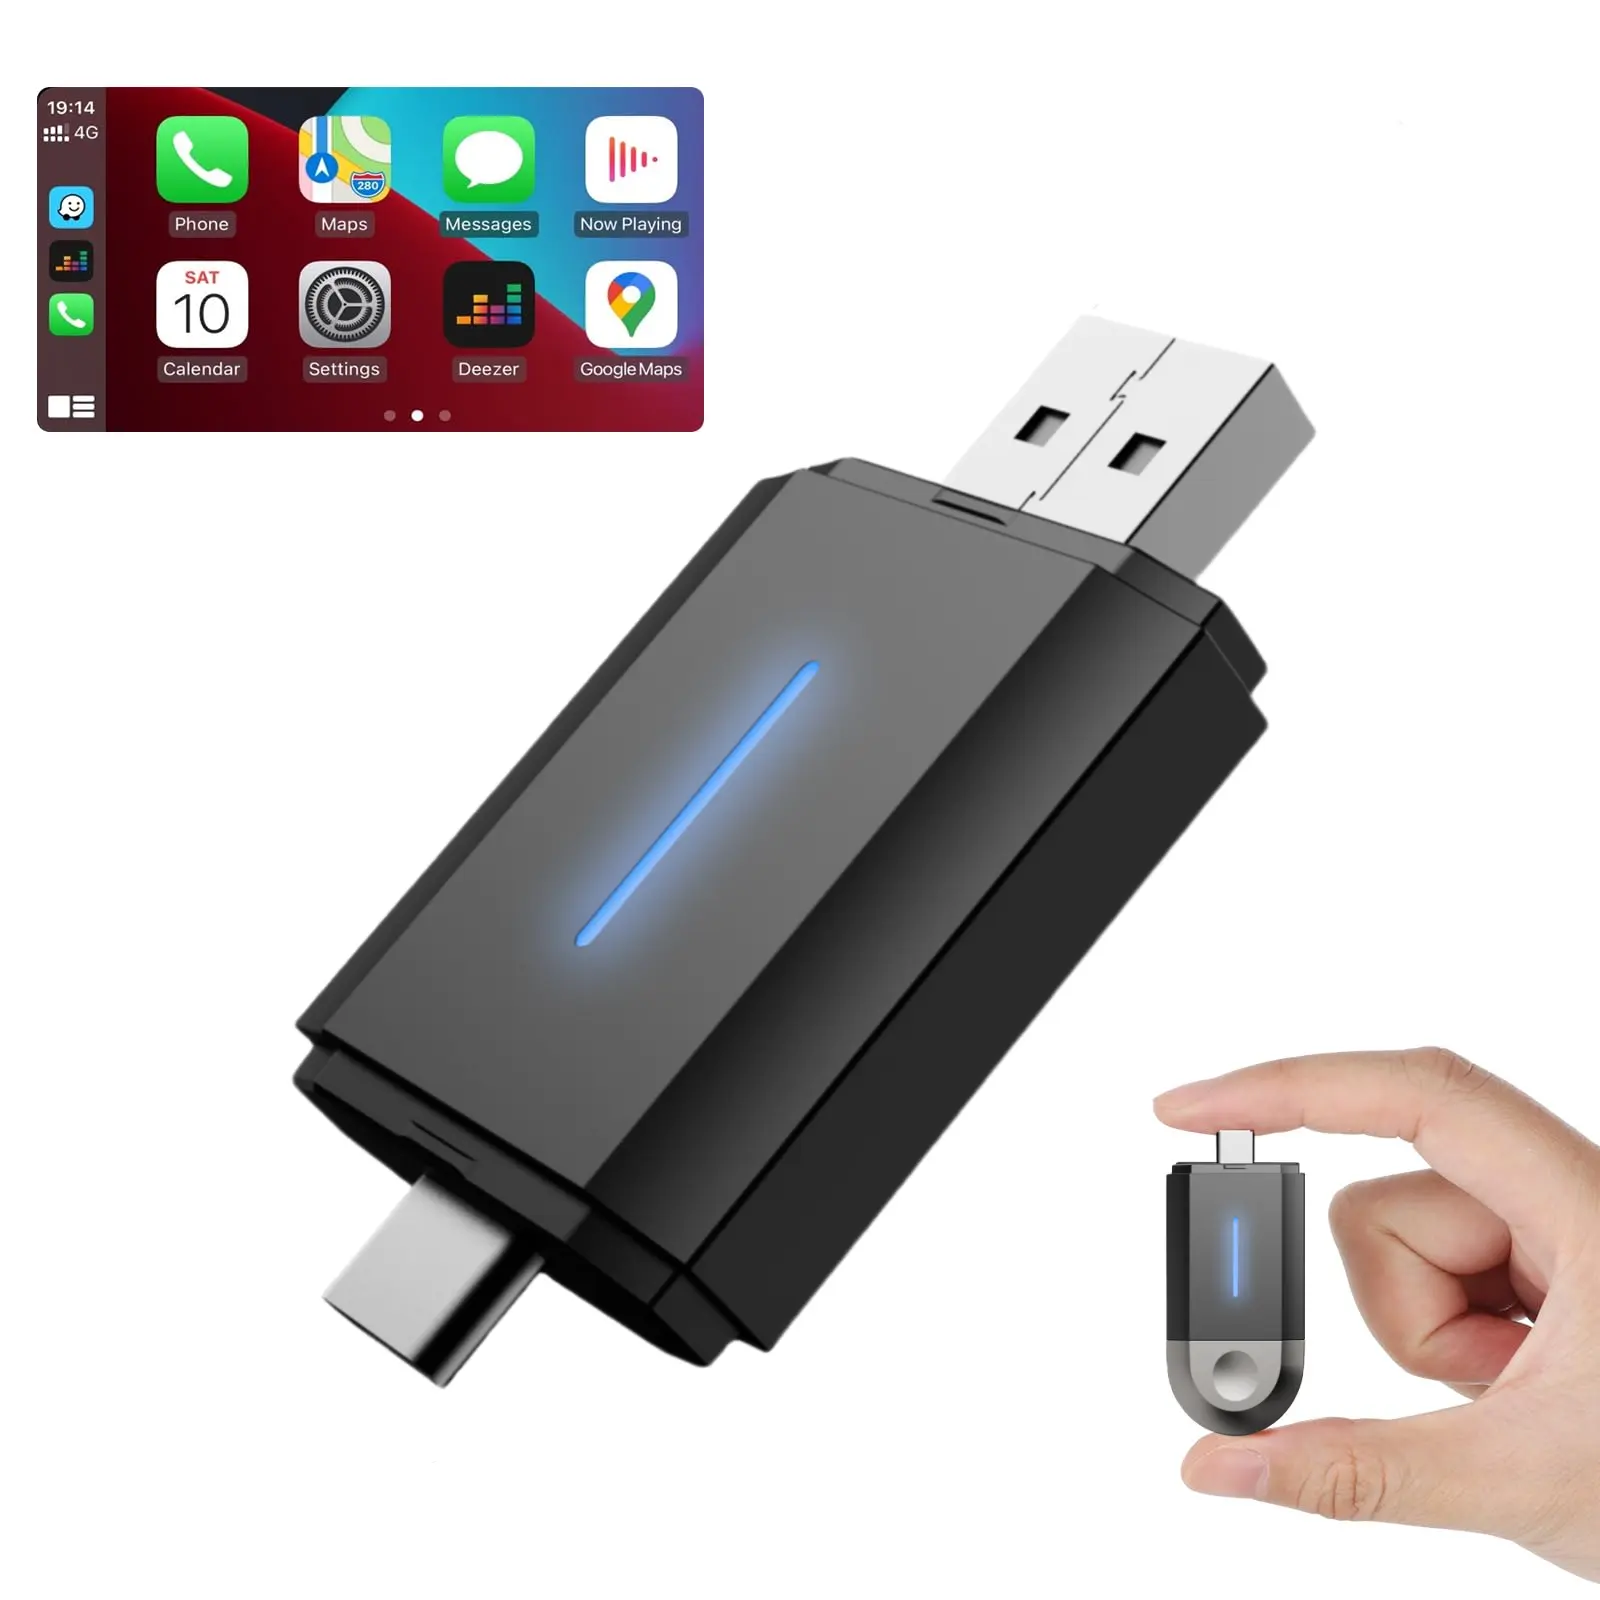 PhoebusLink 2-in-1 tragbarer drahtloser CarPlay-Adapter Android Auto-Dongle USB Typ-C Ports Stecker- und Stecker-Anlage drahtloser CarPlay-Adapter